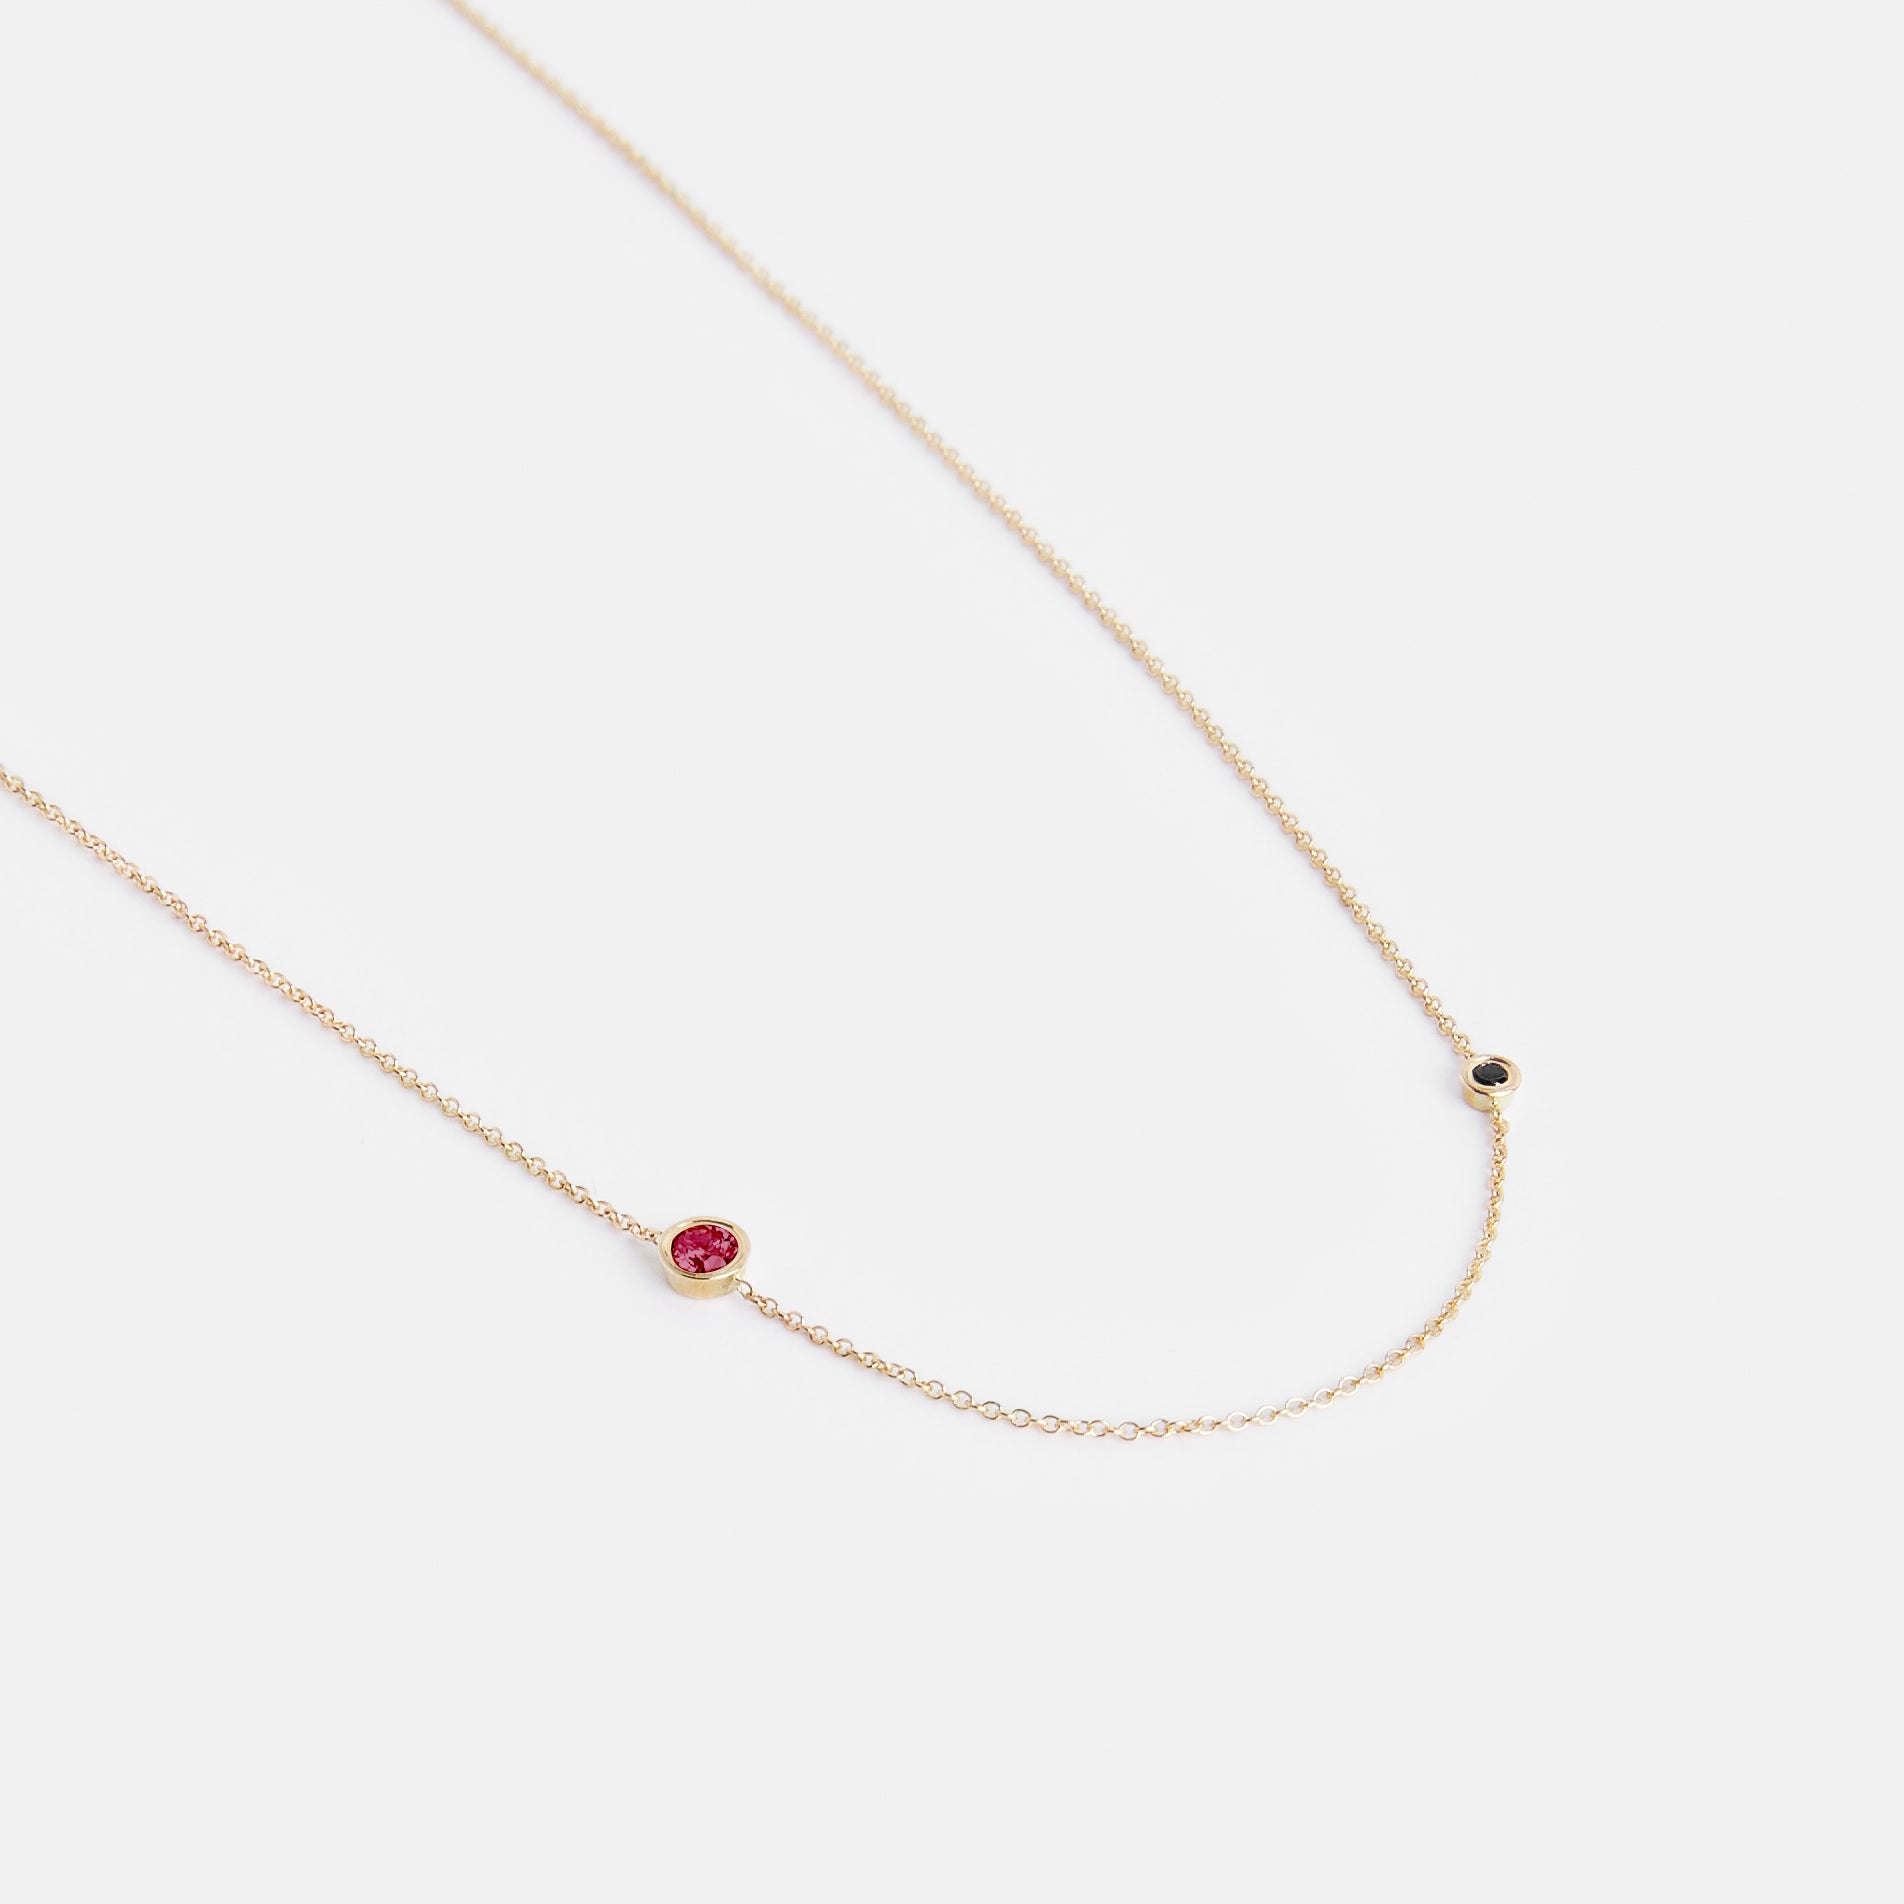 Iba Simple Necklace in 14k Gold set with Black Diamond and Ruby By SHW Fine Jewelry NYC